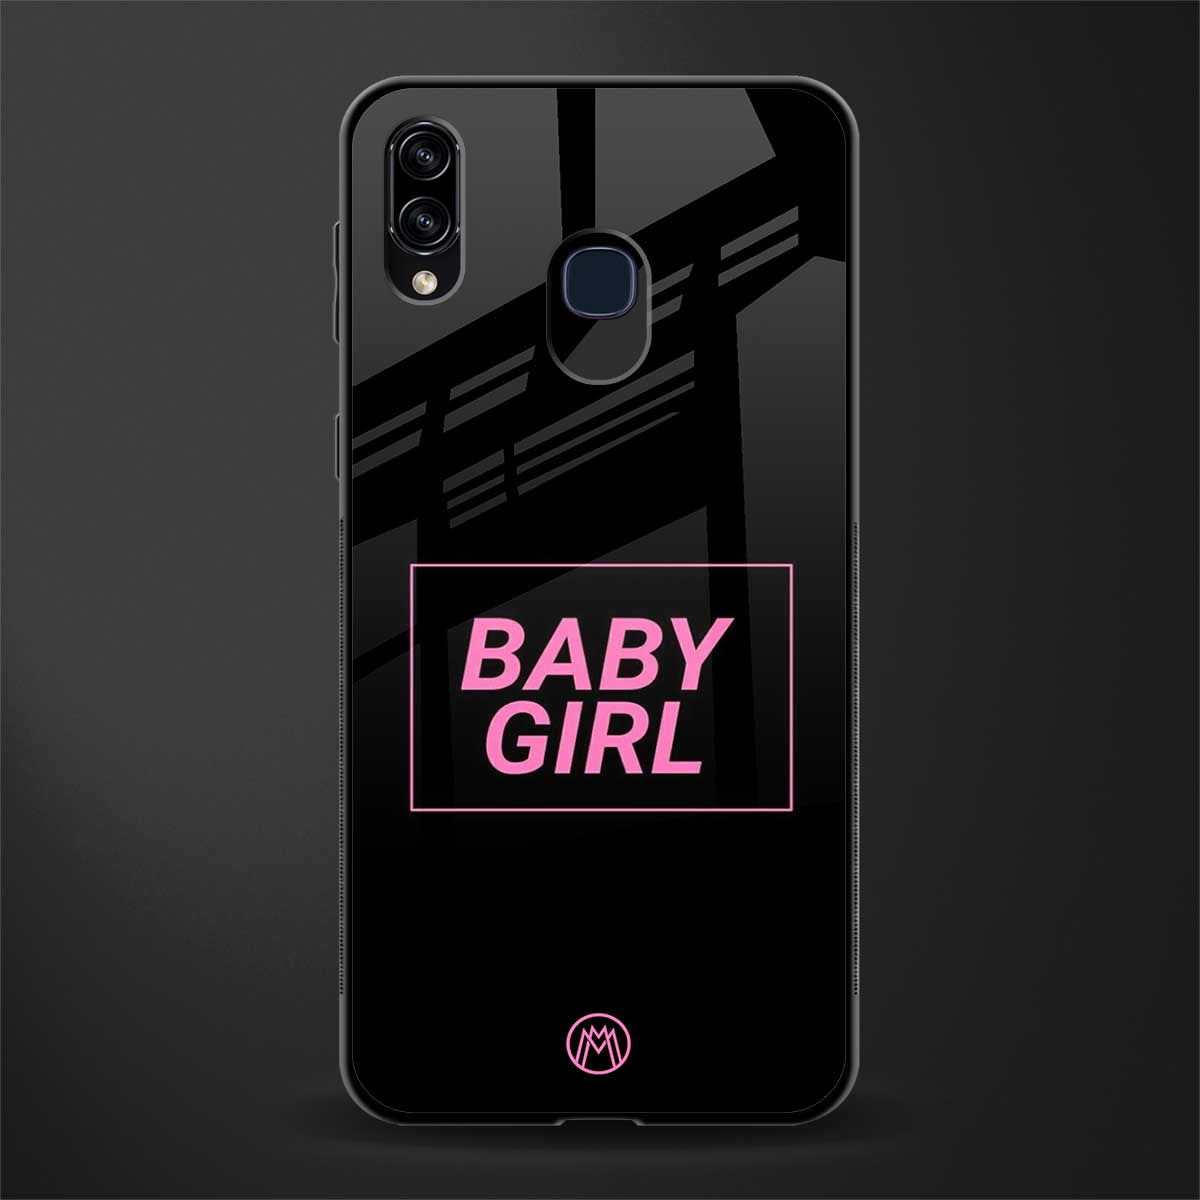 baby girl glass case for samsung galaxy a30 image